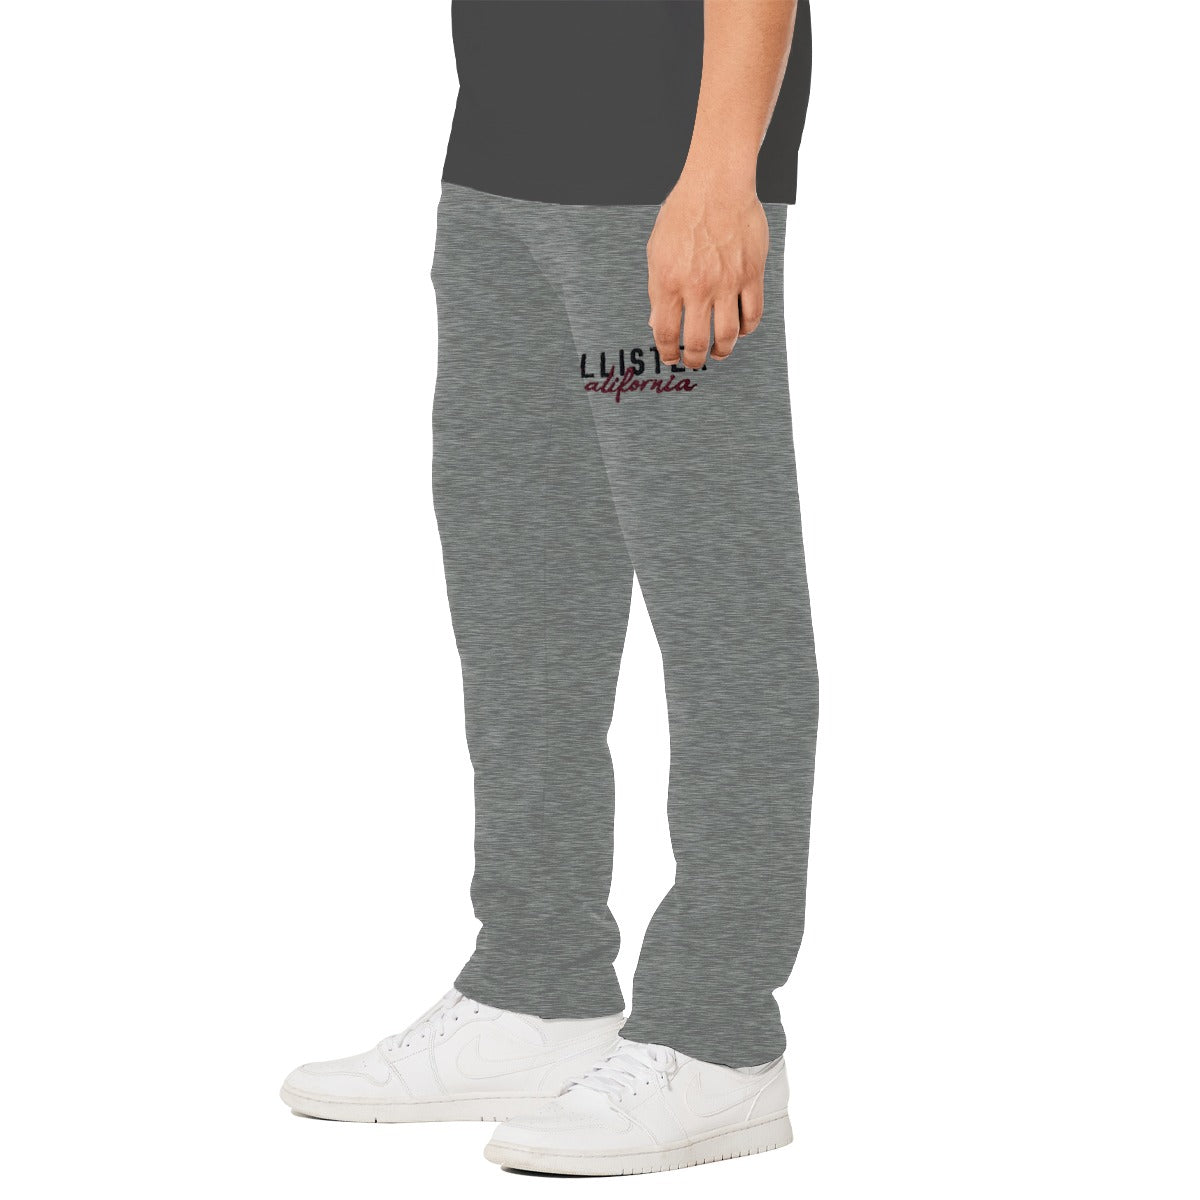 HLSTR SIGNATURE EMBROIDERED SWEAT PANT